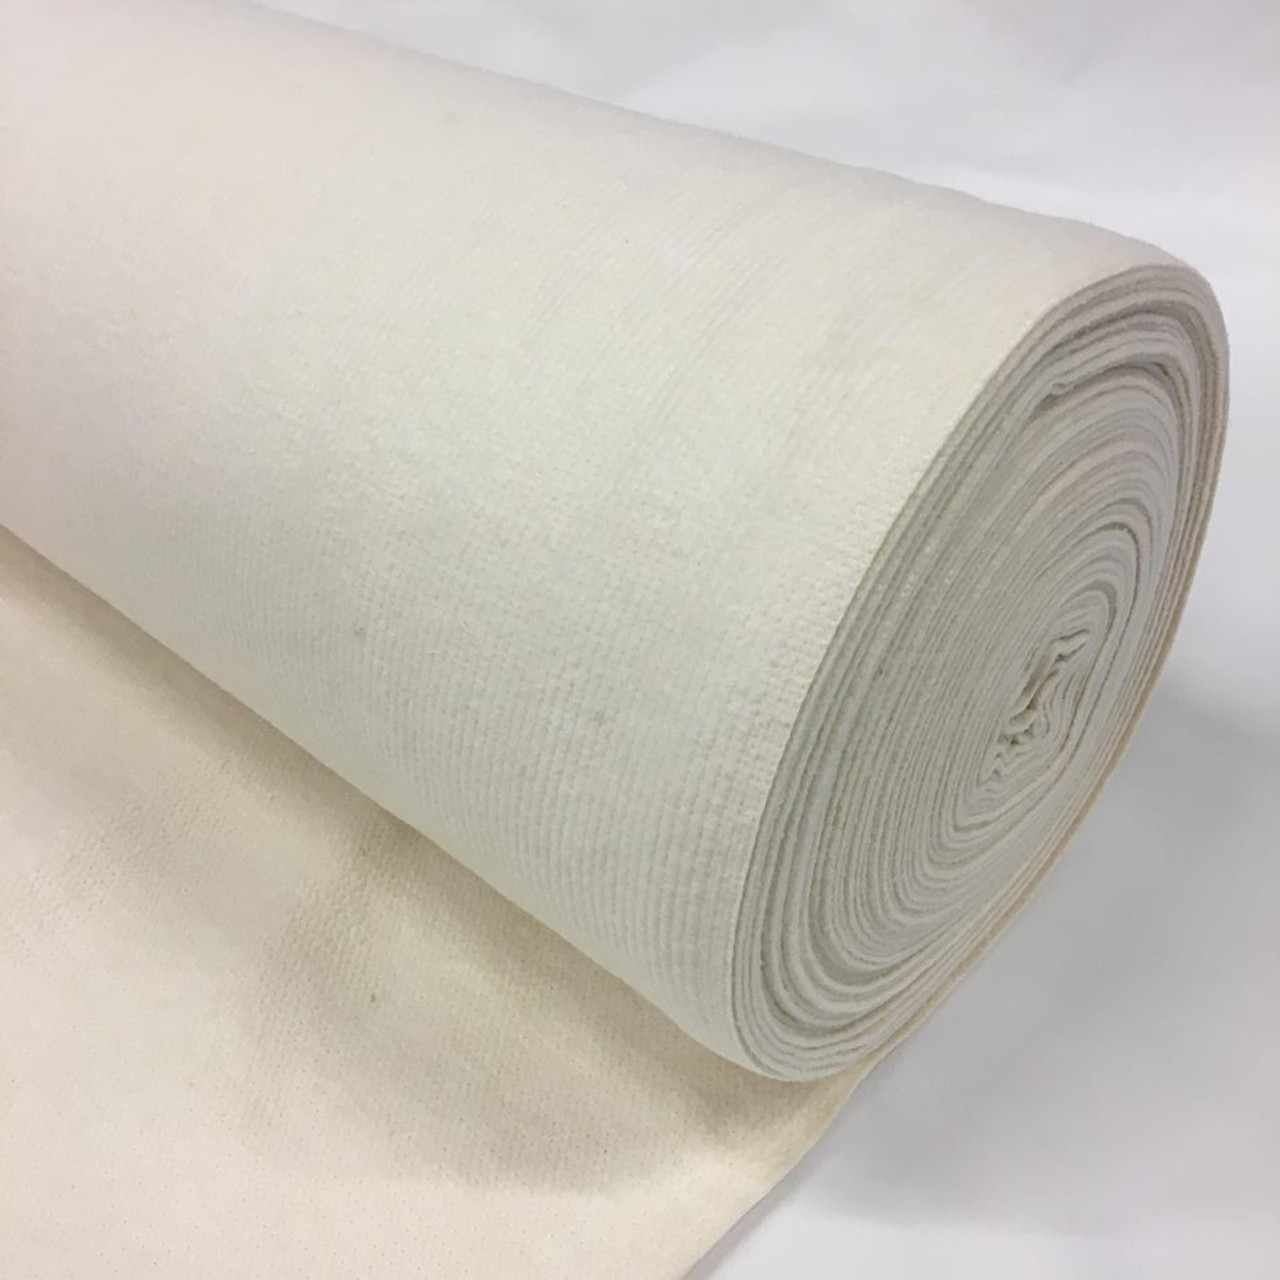 Quilters Dream Cotton Batting Roll